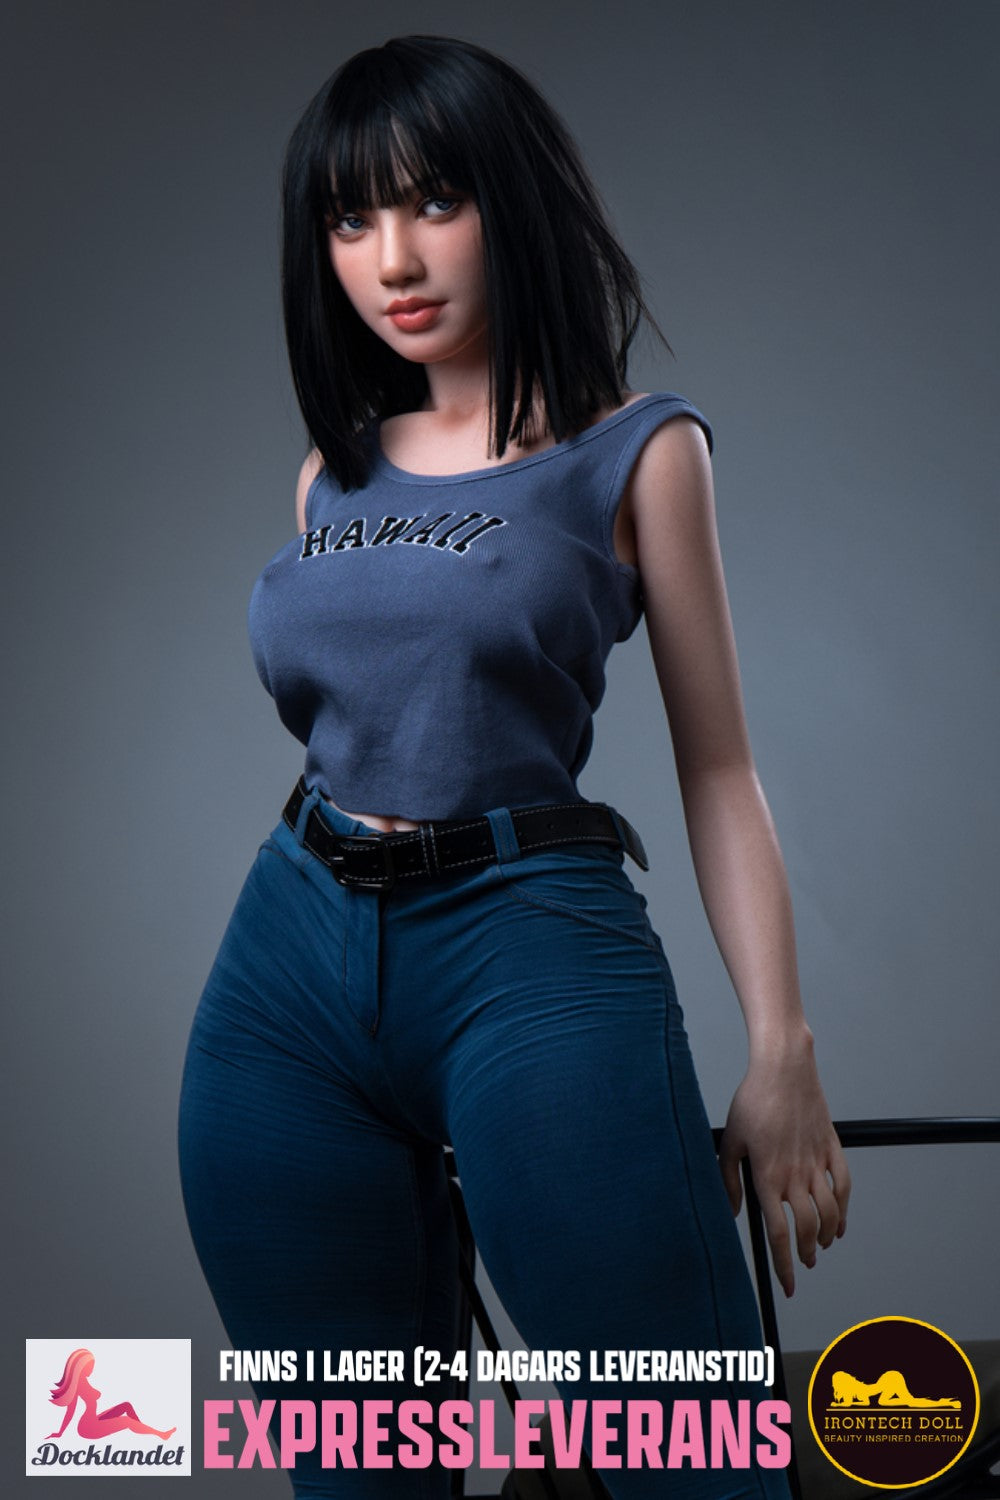 Draw Sex Doll (Irontech Doll 153cm E-Kupa S30 Silicone) EXPRESS